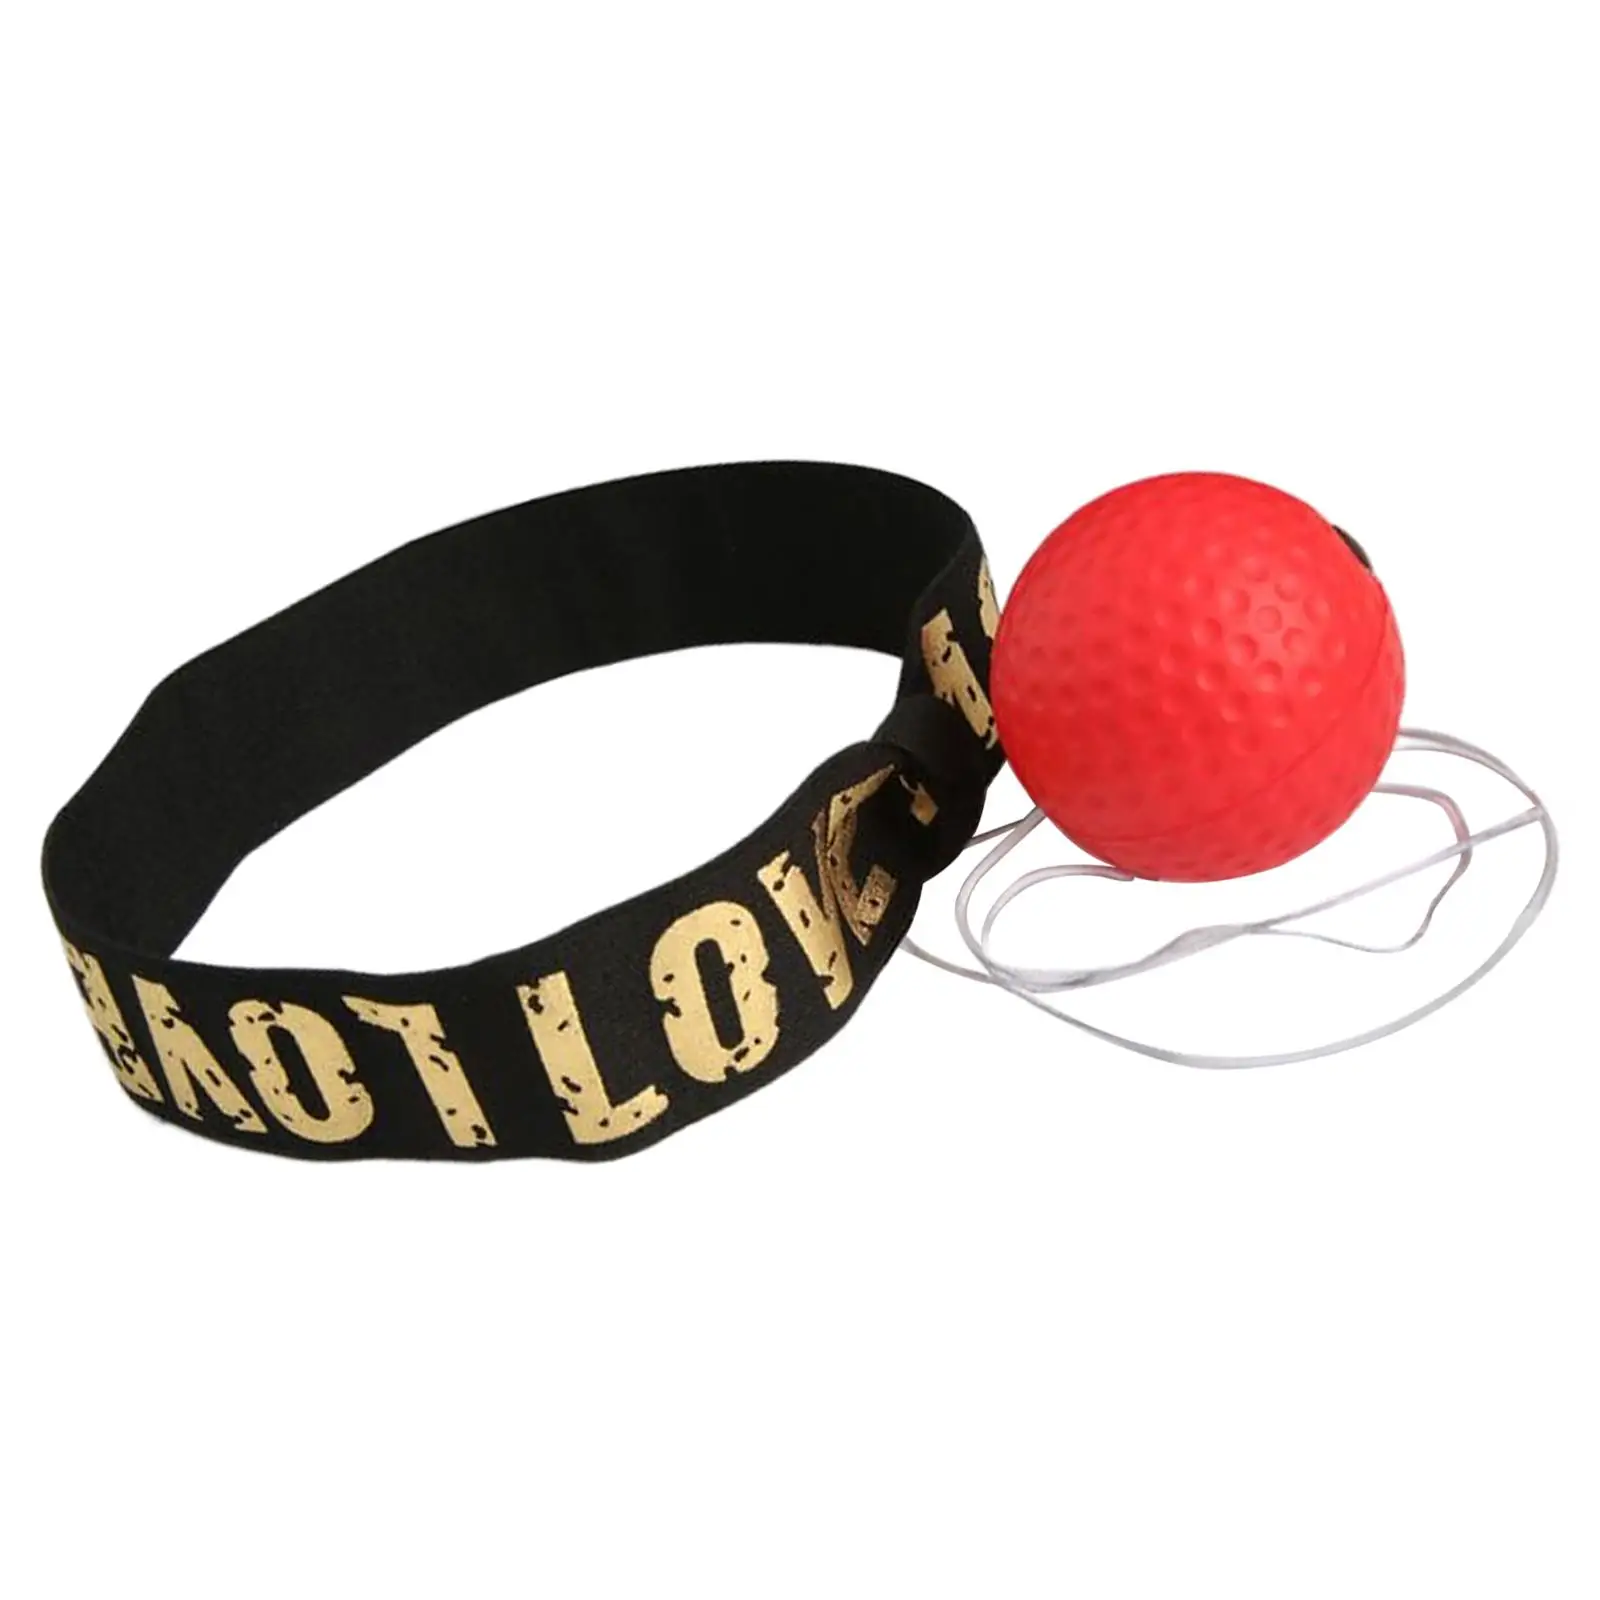 Boxing Reflex Ball Headband Mma Boxing Equipment React Reflex Balls for Agility Punch Practice Fitness Home Gym Sports Trainer